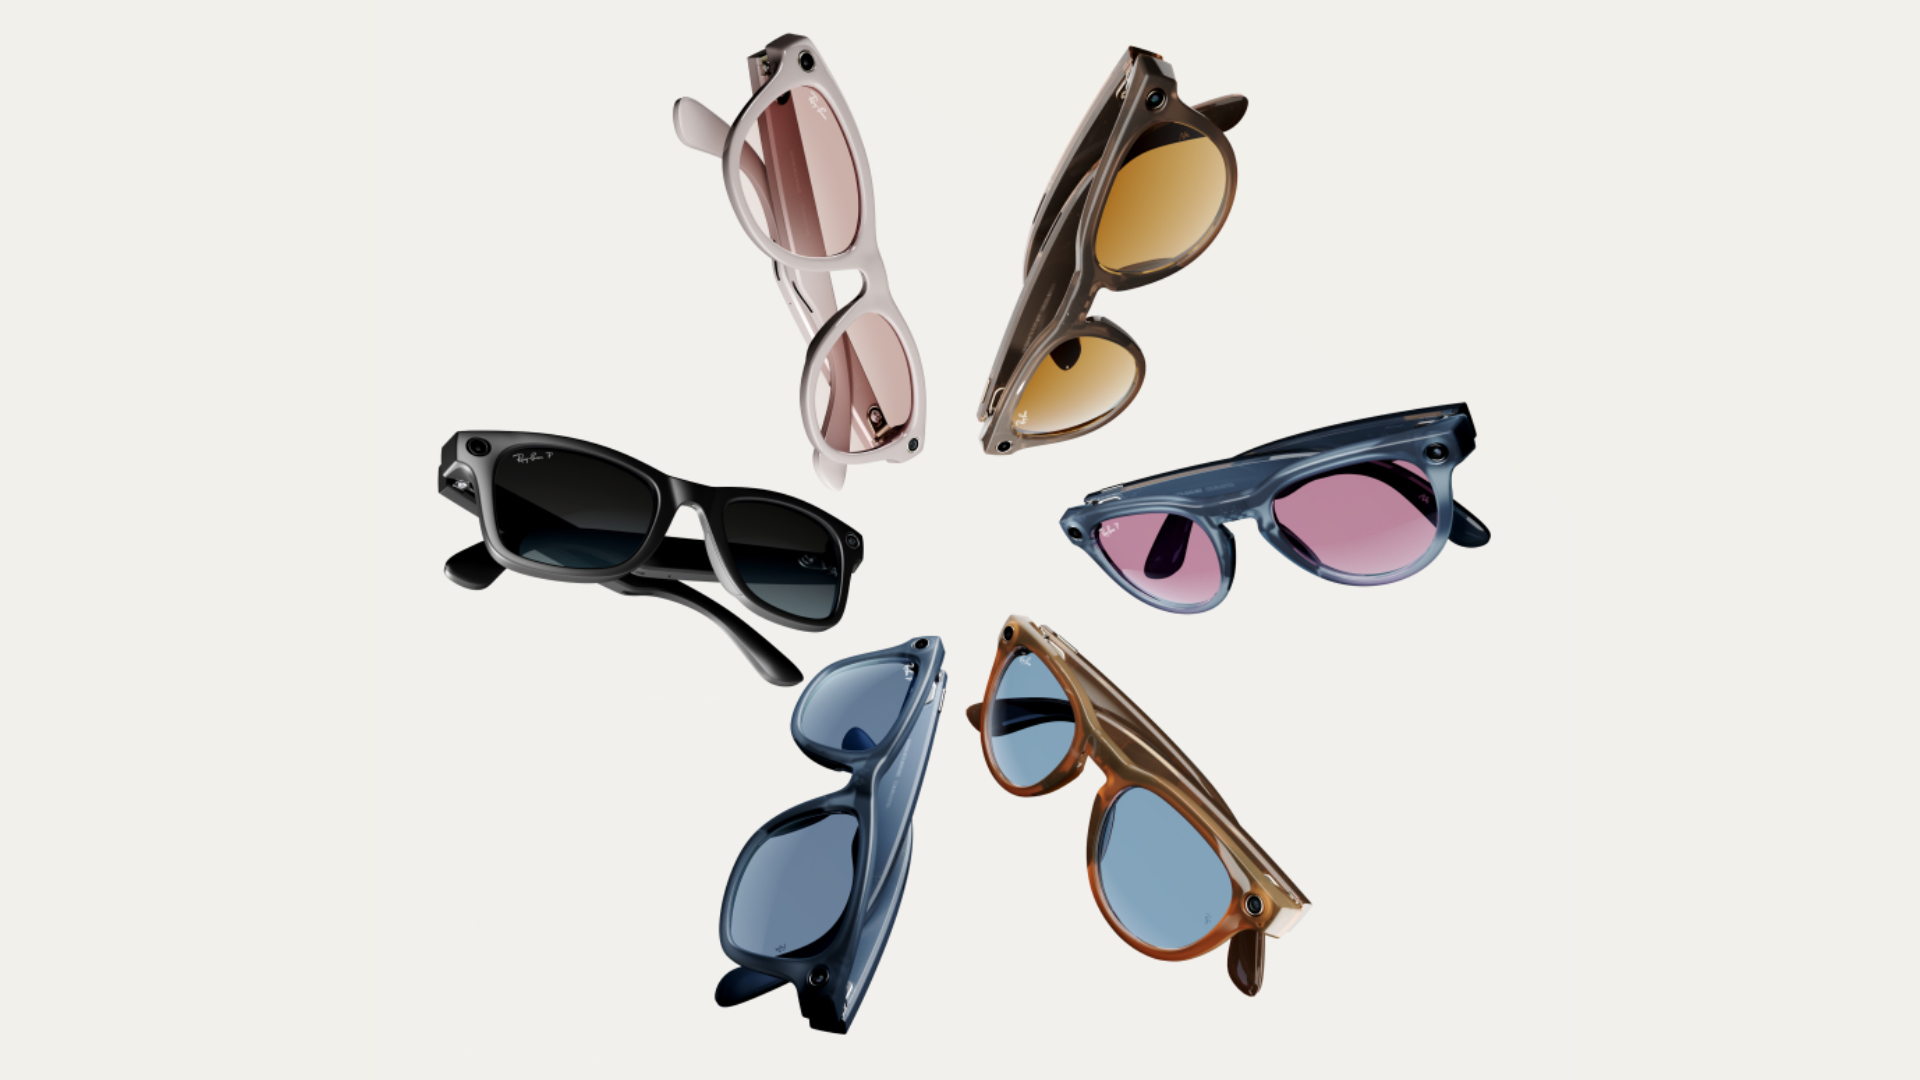 New colorways for Meta Ray-Ban.